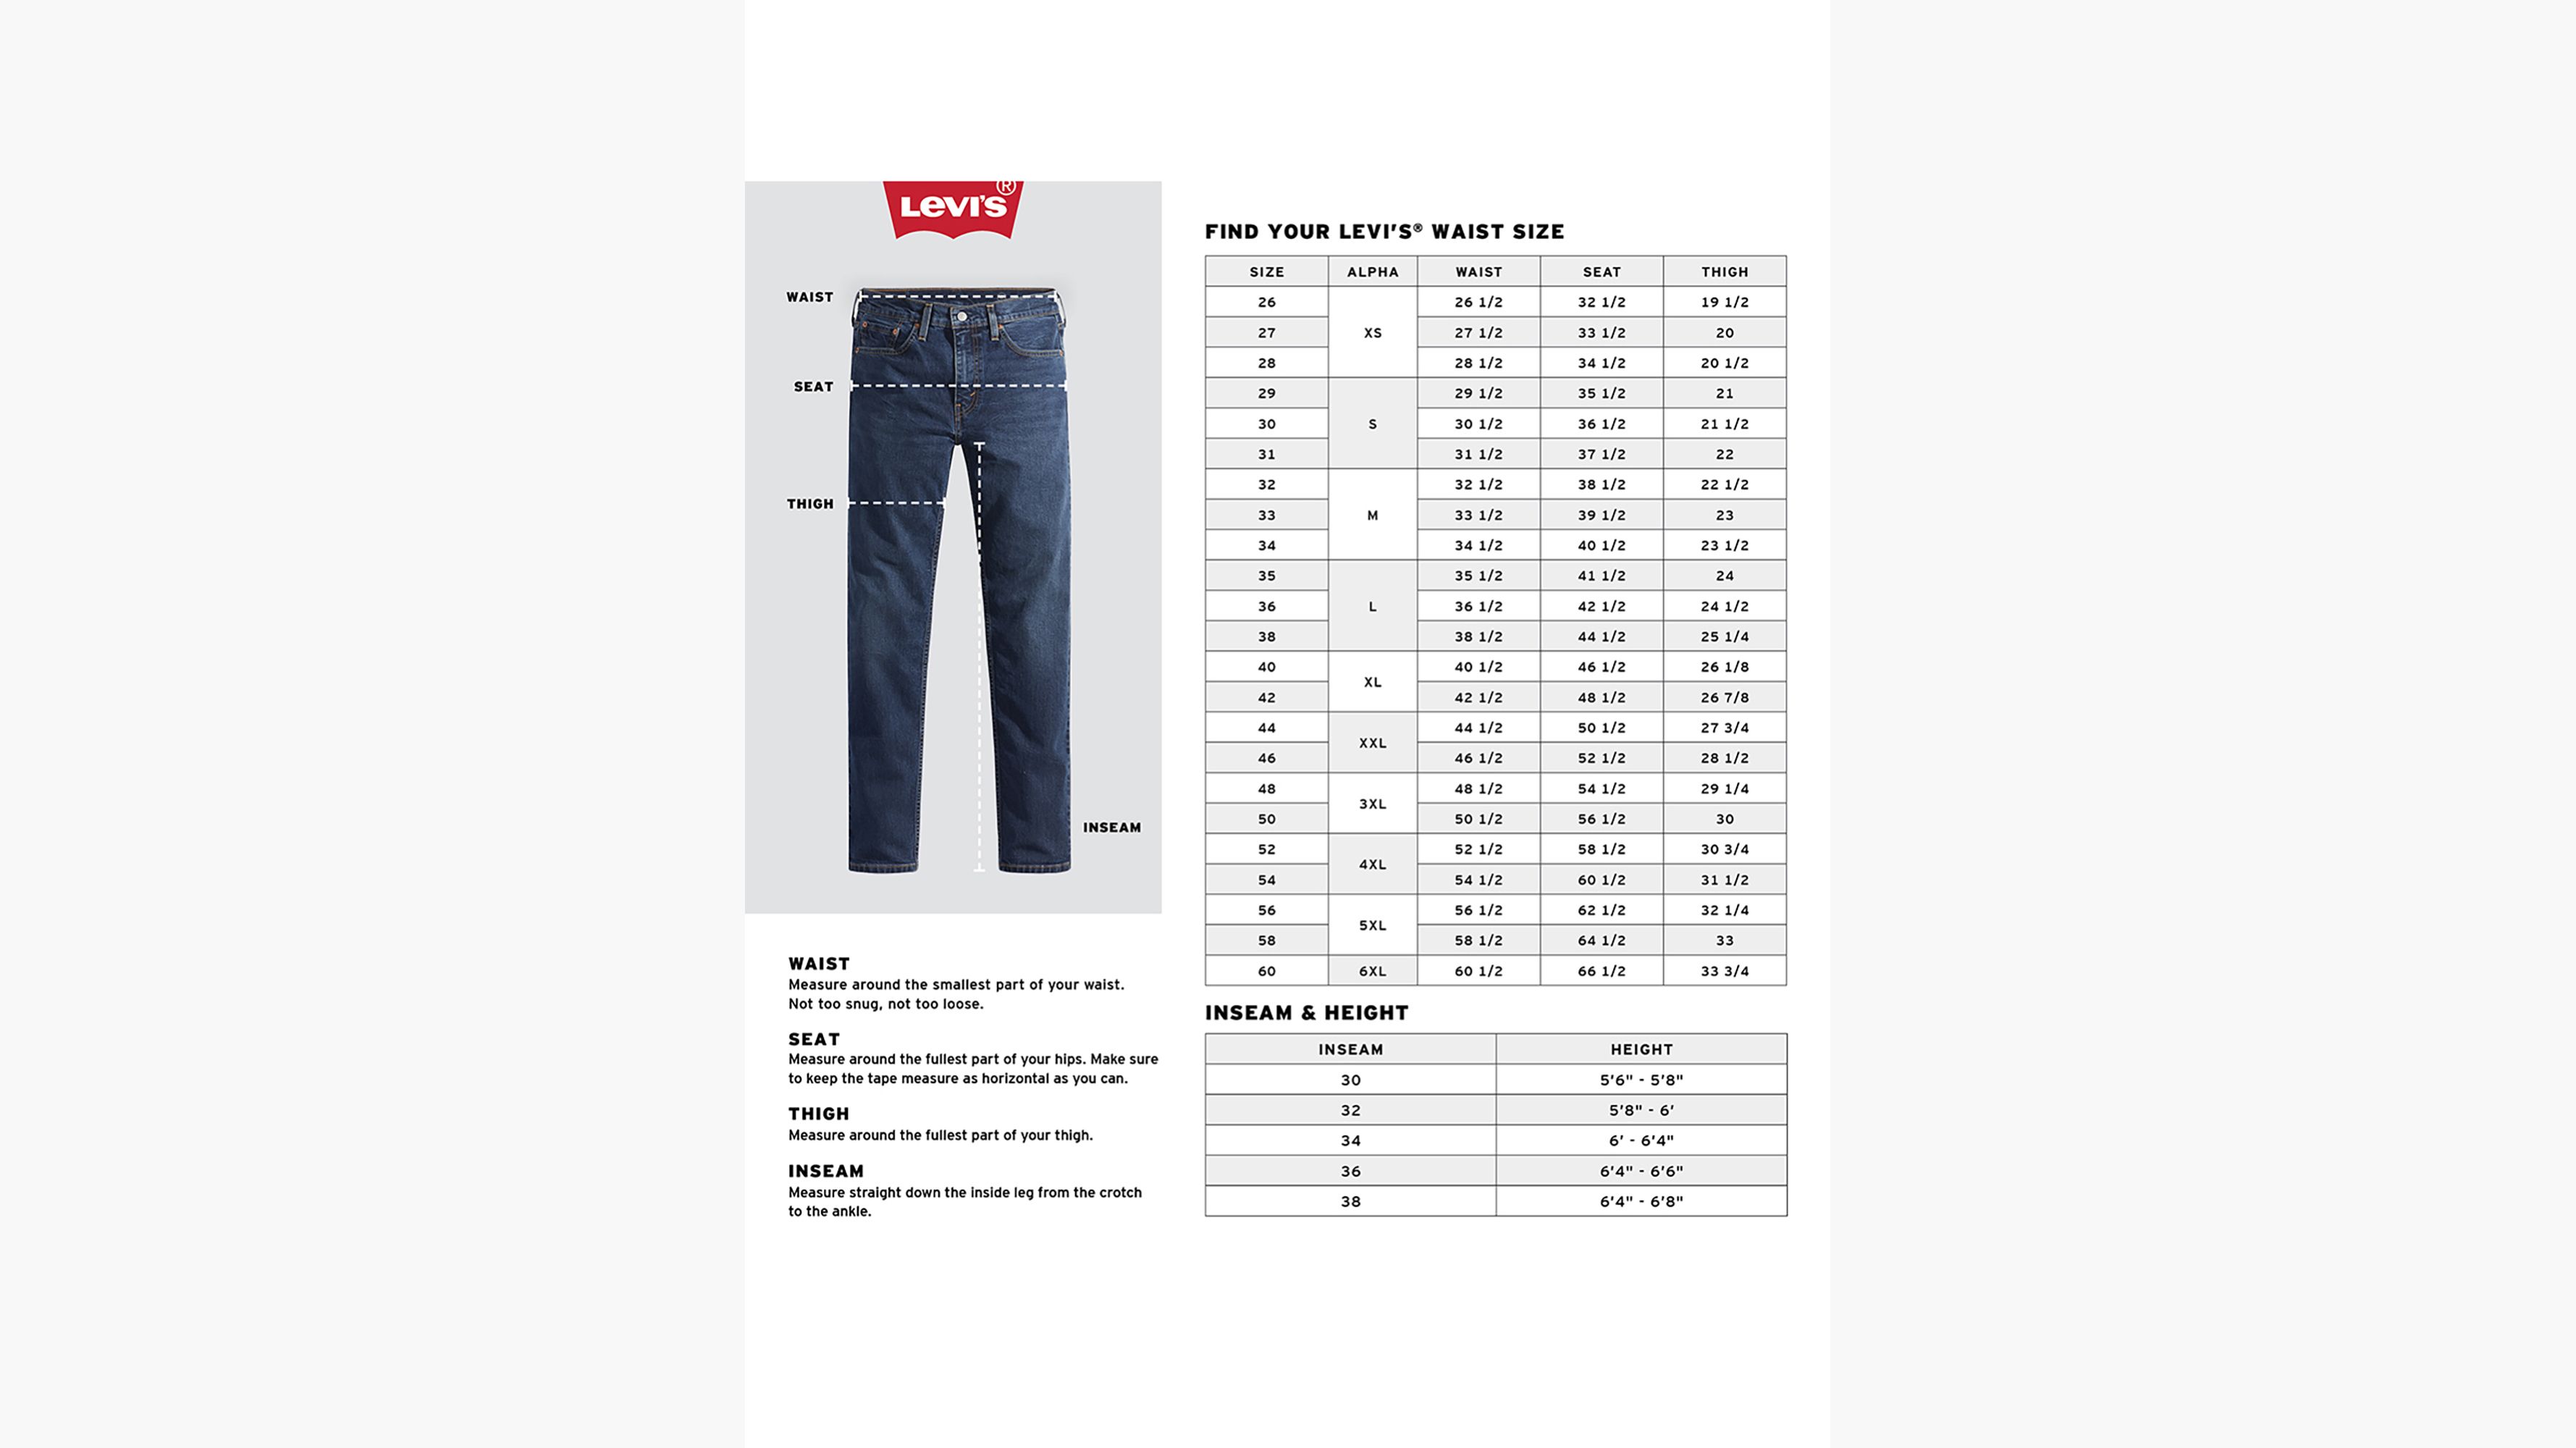 569™ Loose Straight Fit Men's Jeans